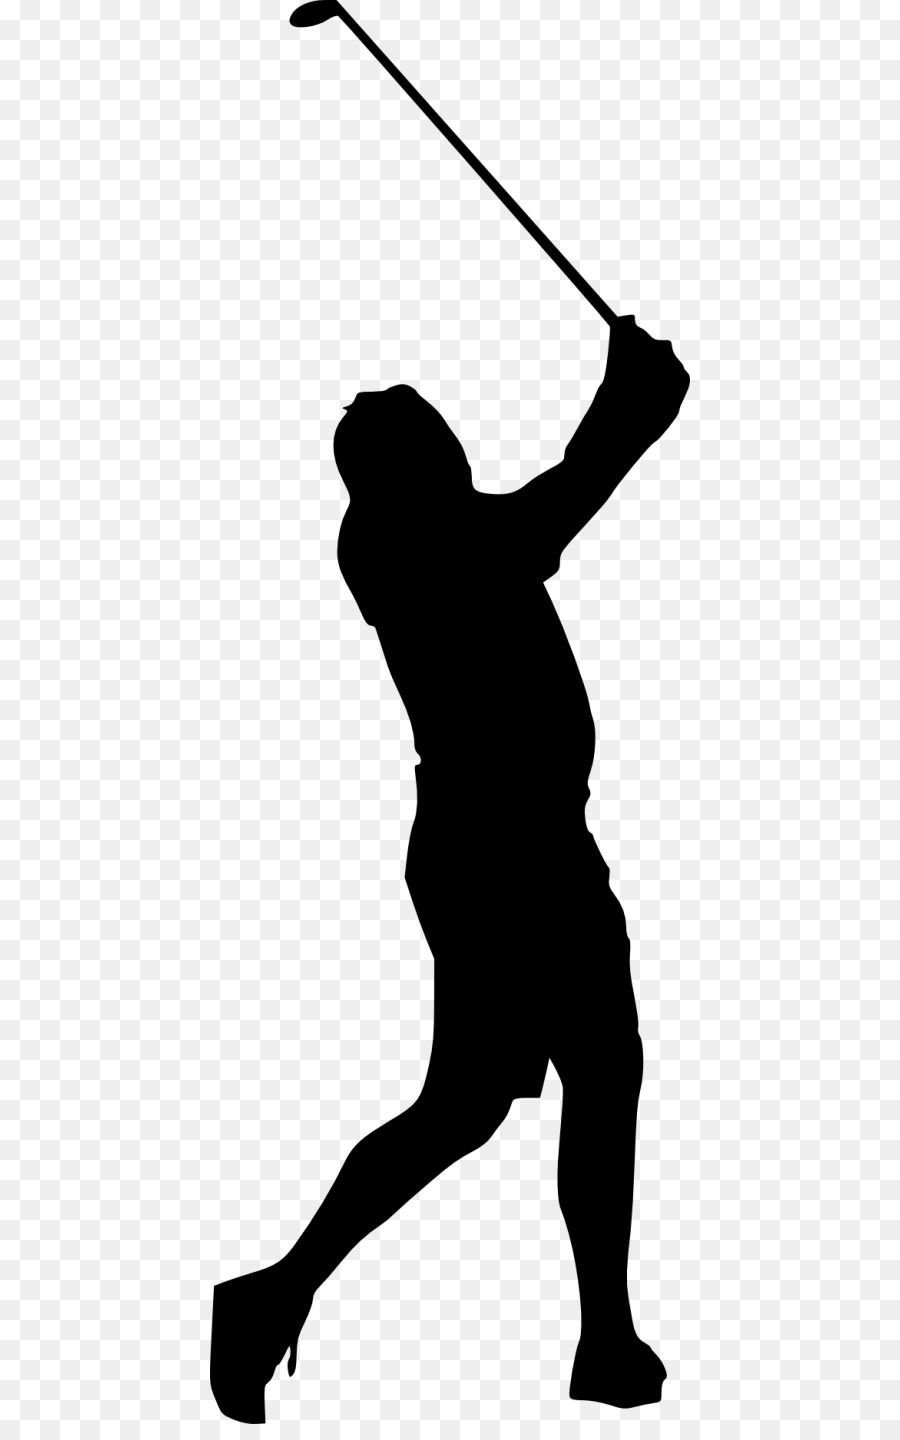 Silhouette Golf Clip art - Silhouette png download - 480*1424 - Free Transparent Silhouette png Download.